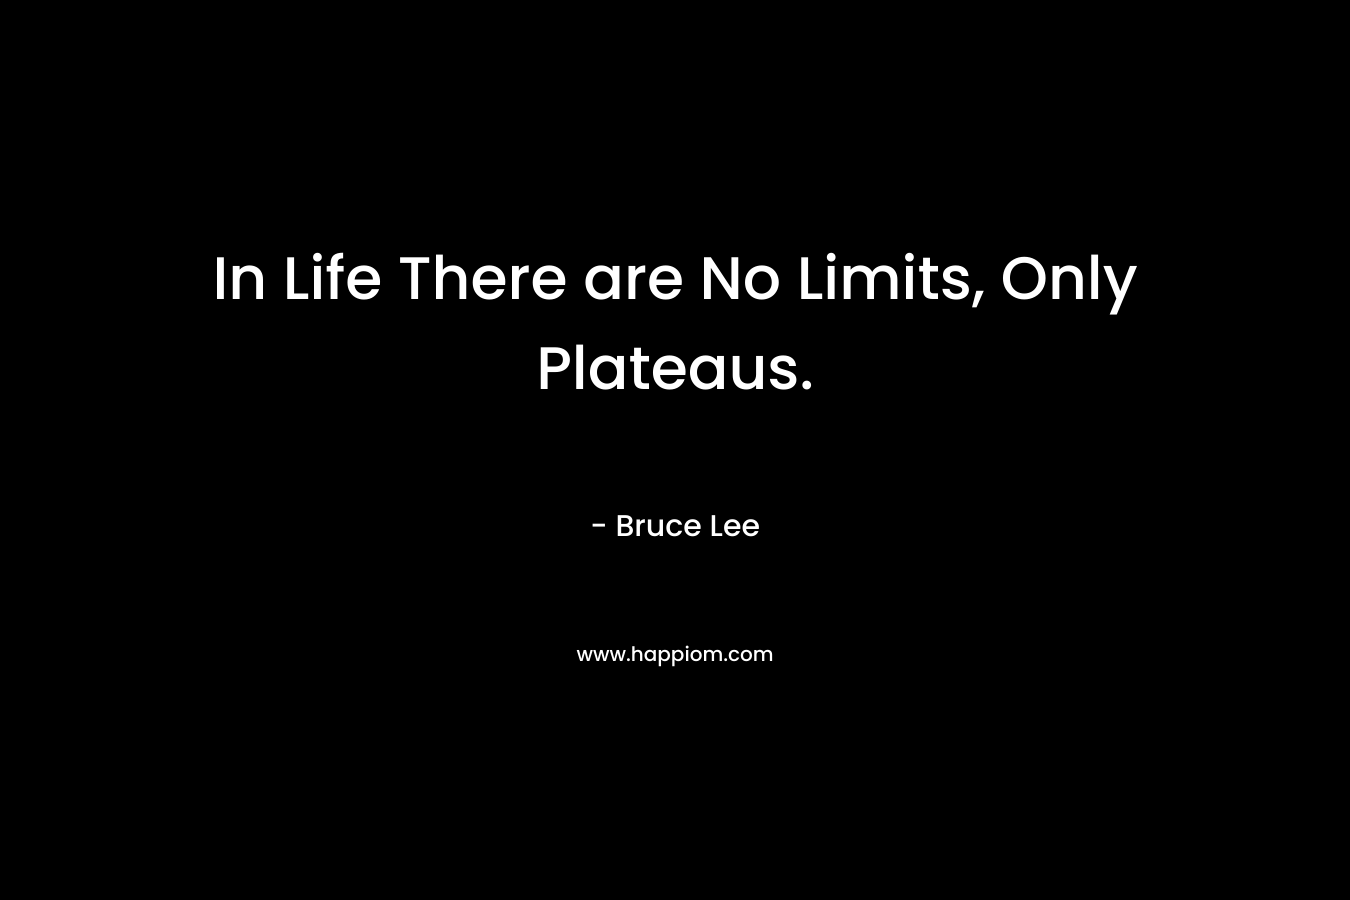 In Life There are No Limits, Only Plateaus. – Bruce Lee